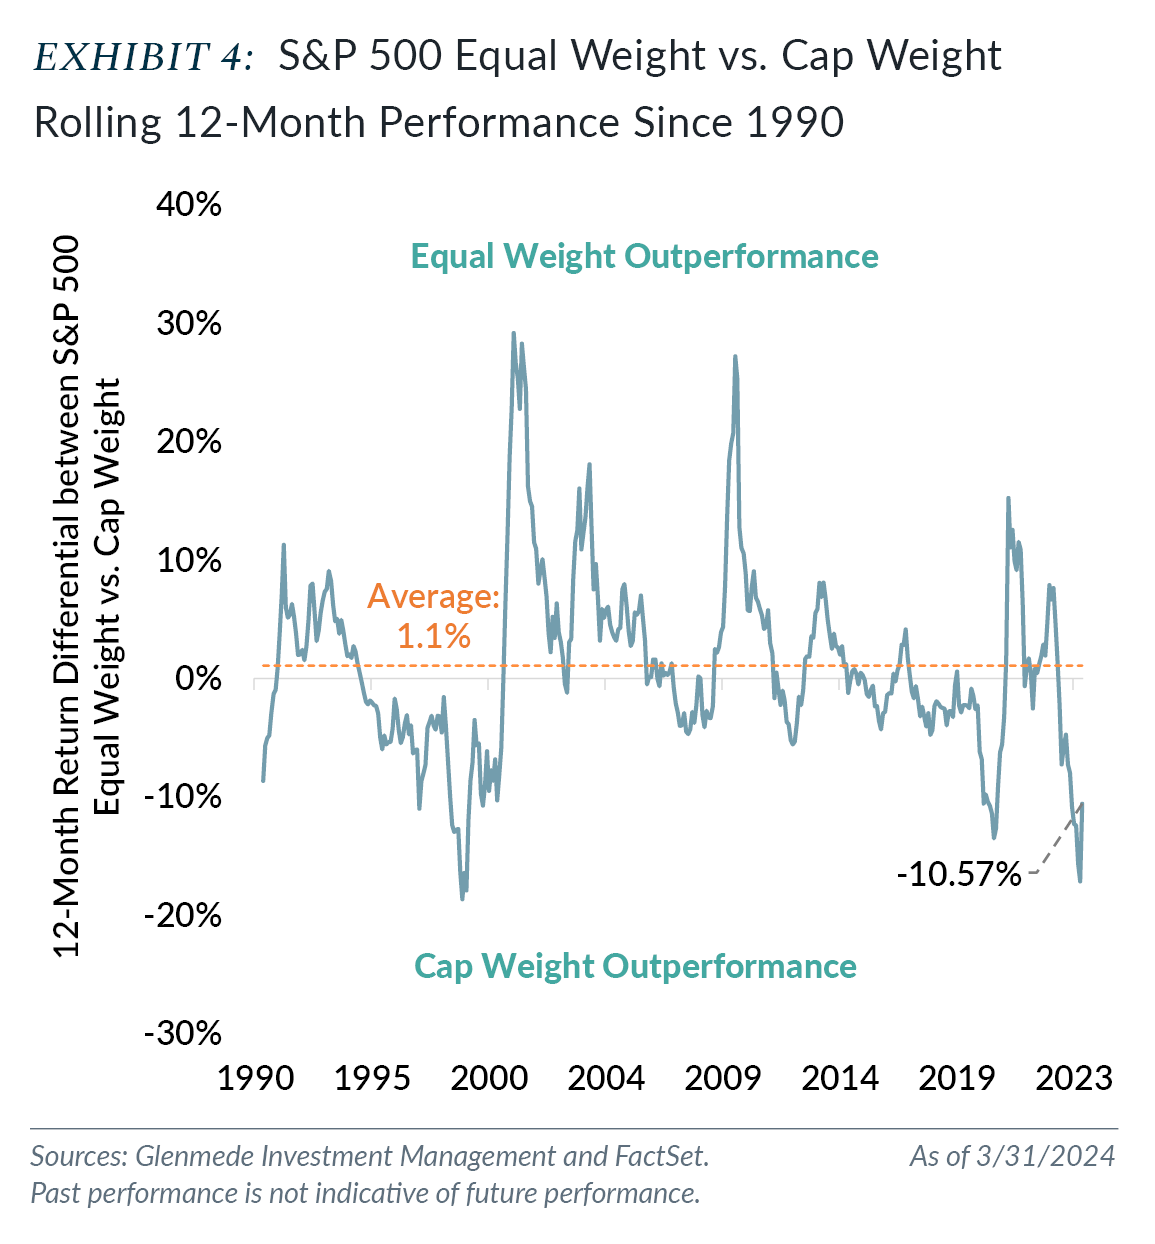 Exhibit 4: S&P 500 Equal Weight vs. Cap Weight Rolling 12-Month Performance Since 1990